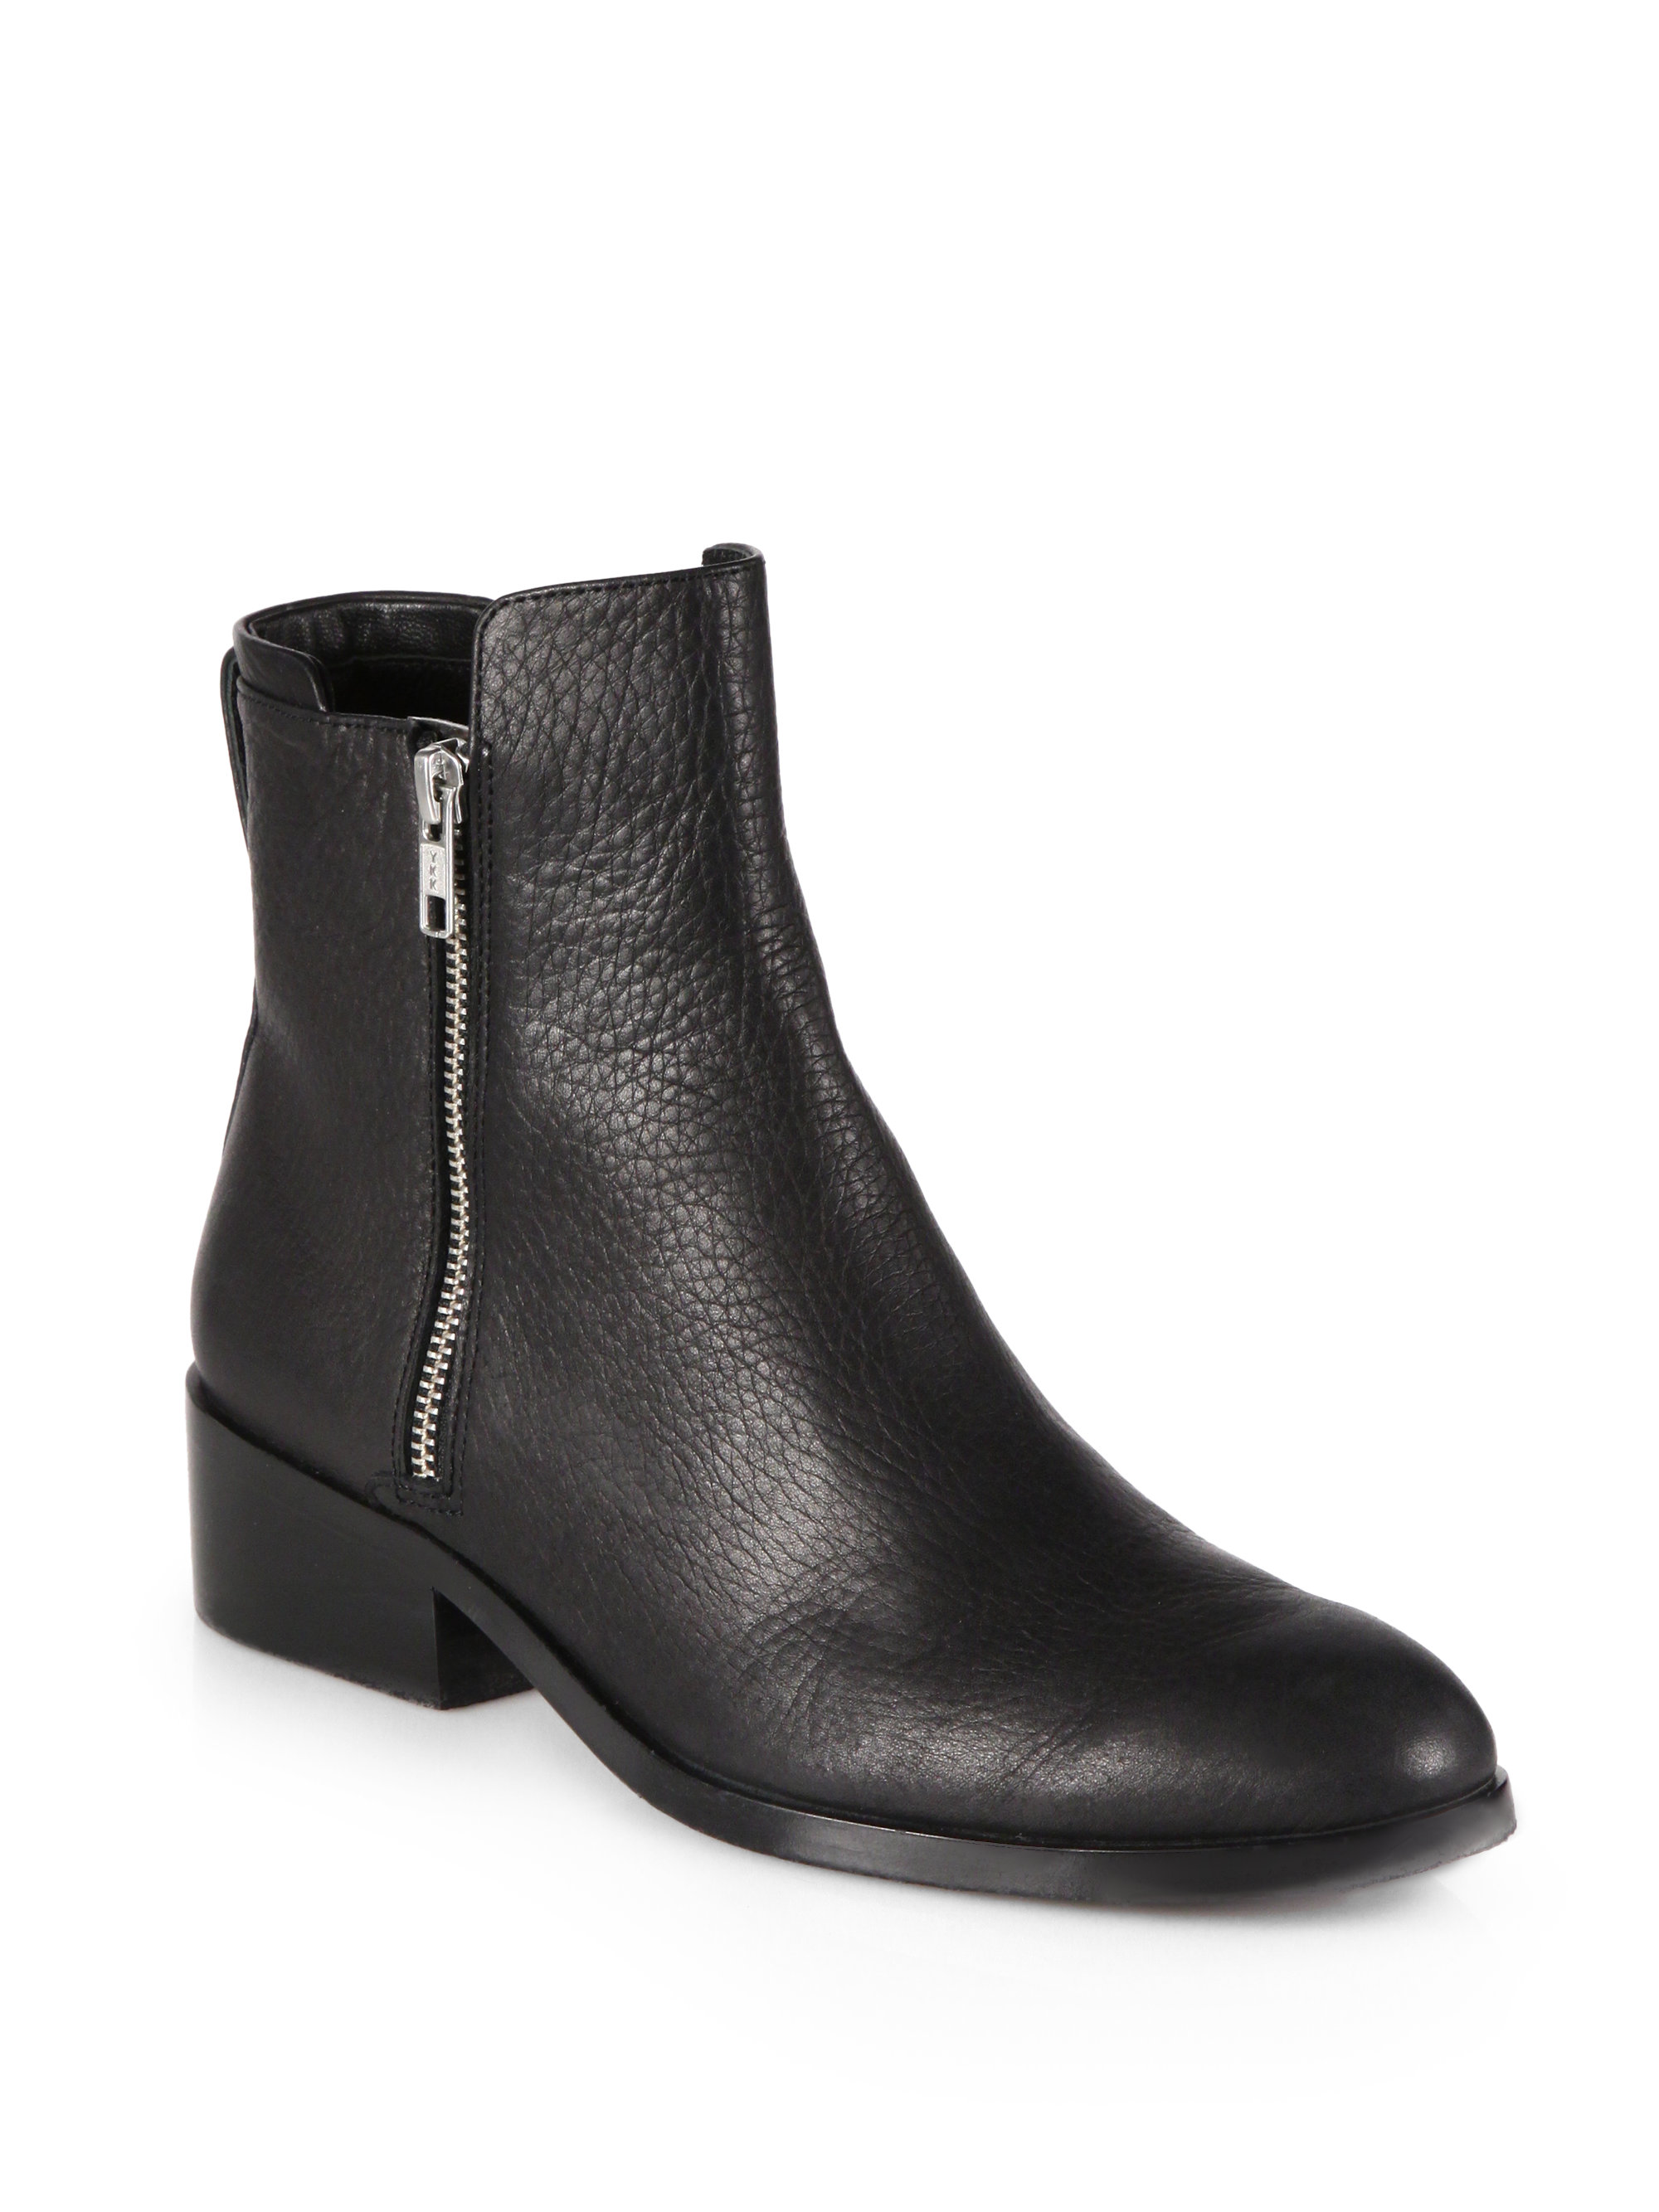 Lyst - 3.1 phillip lim Alexa Leather Ankle Boots in Black